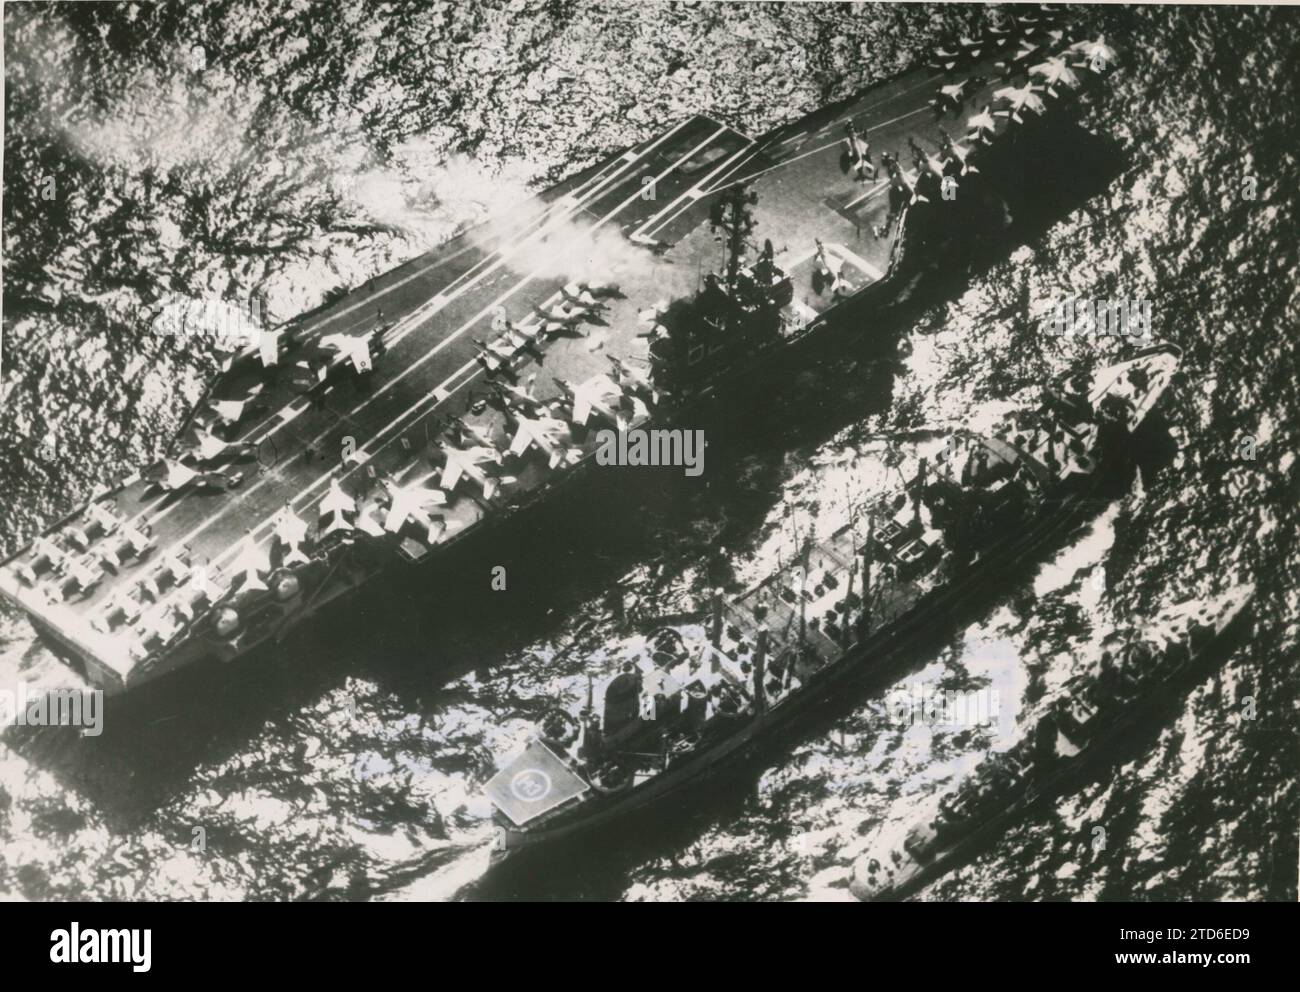 12/31/1961. Sea of the Antilles. A real fleet has been arranged to make effective the blockade of Cuba established by Kennedy. In the Photo, the Atomic Aircraft Carrier 'Enterprise', 73,000 Tons Coordinated Center for All Naval Operations. Credit: Album / Archivo ABC Stock Photo